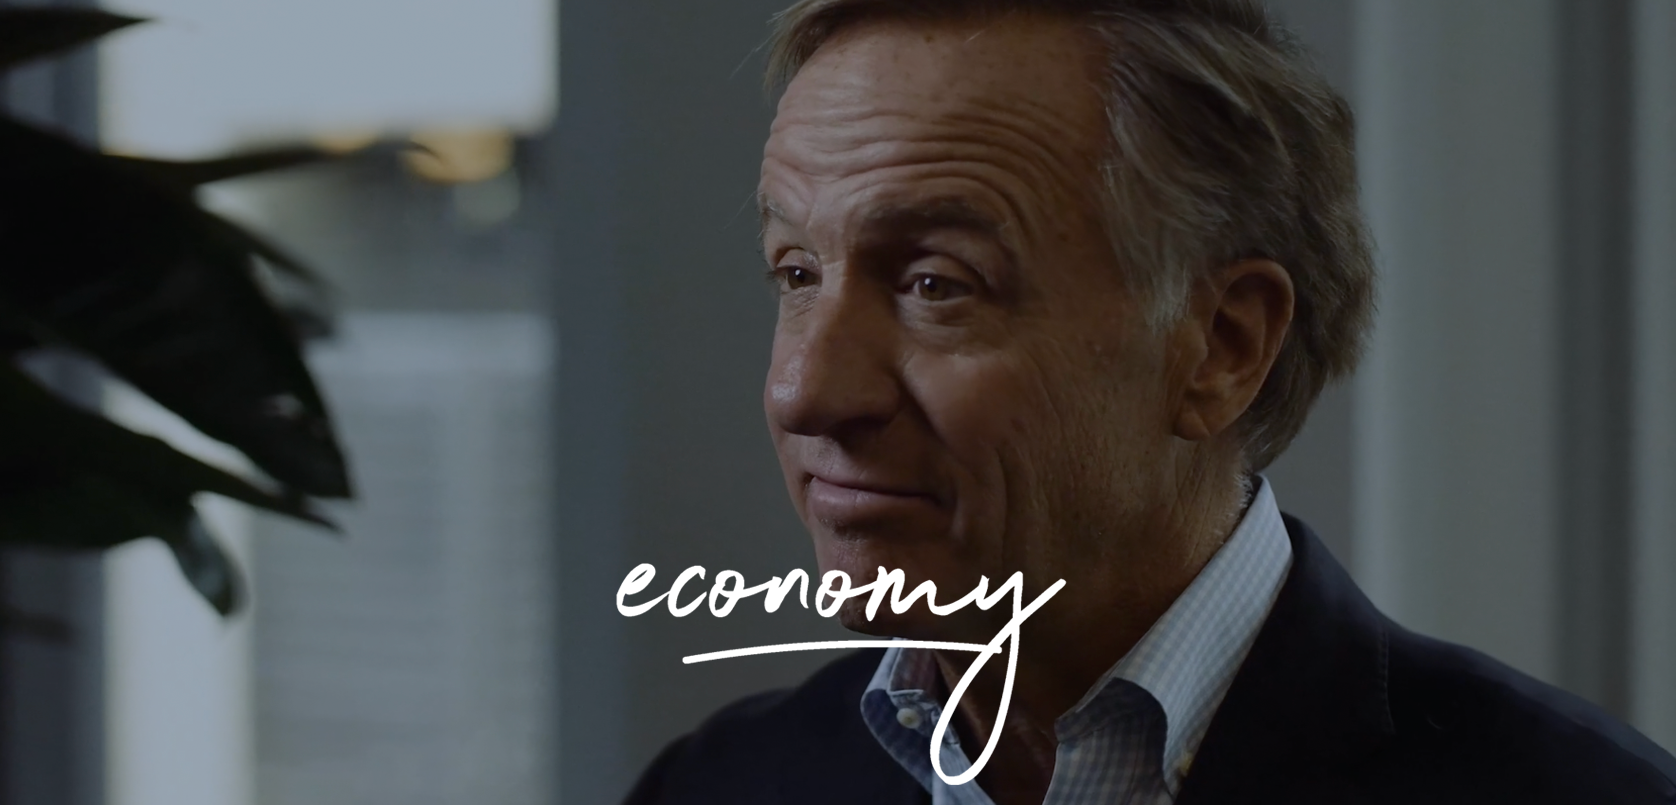 A thoughtful man in a business setting with the word "economy" inscribed across the image, suggesting a focus on financial or economic topics.